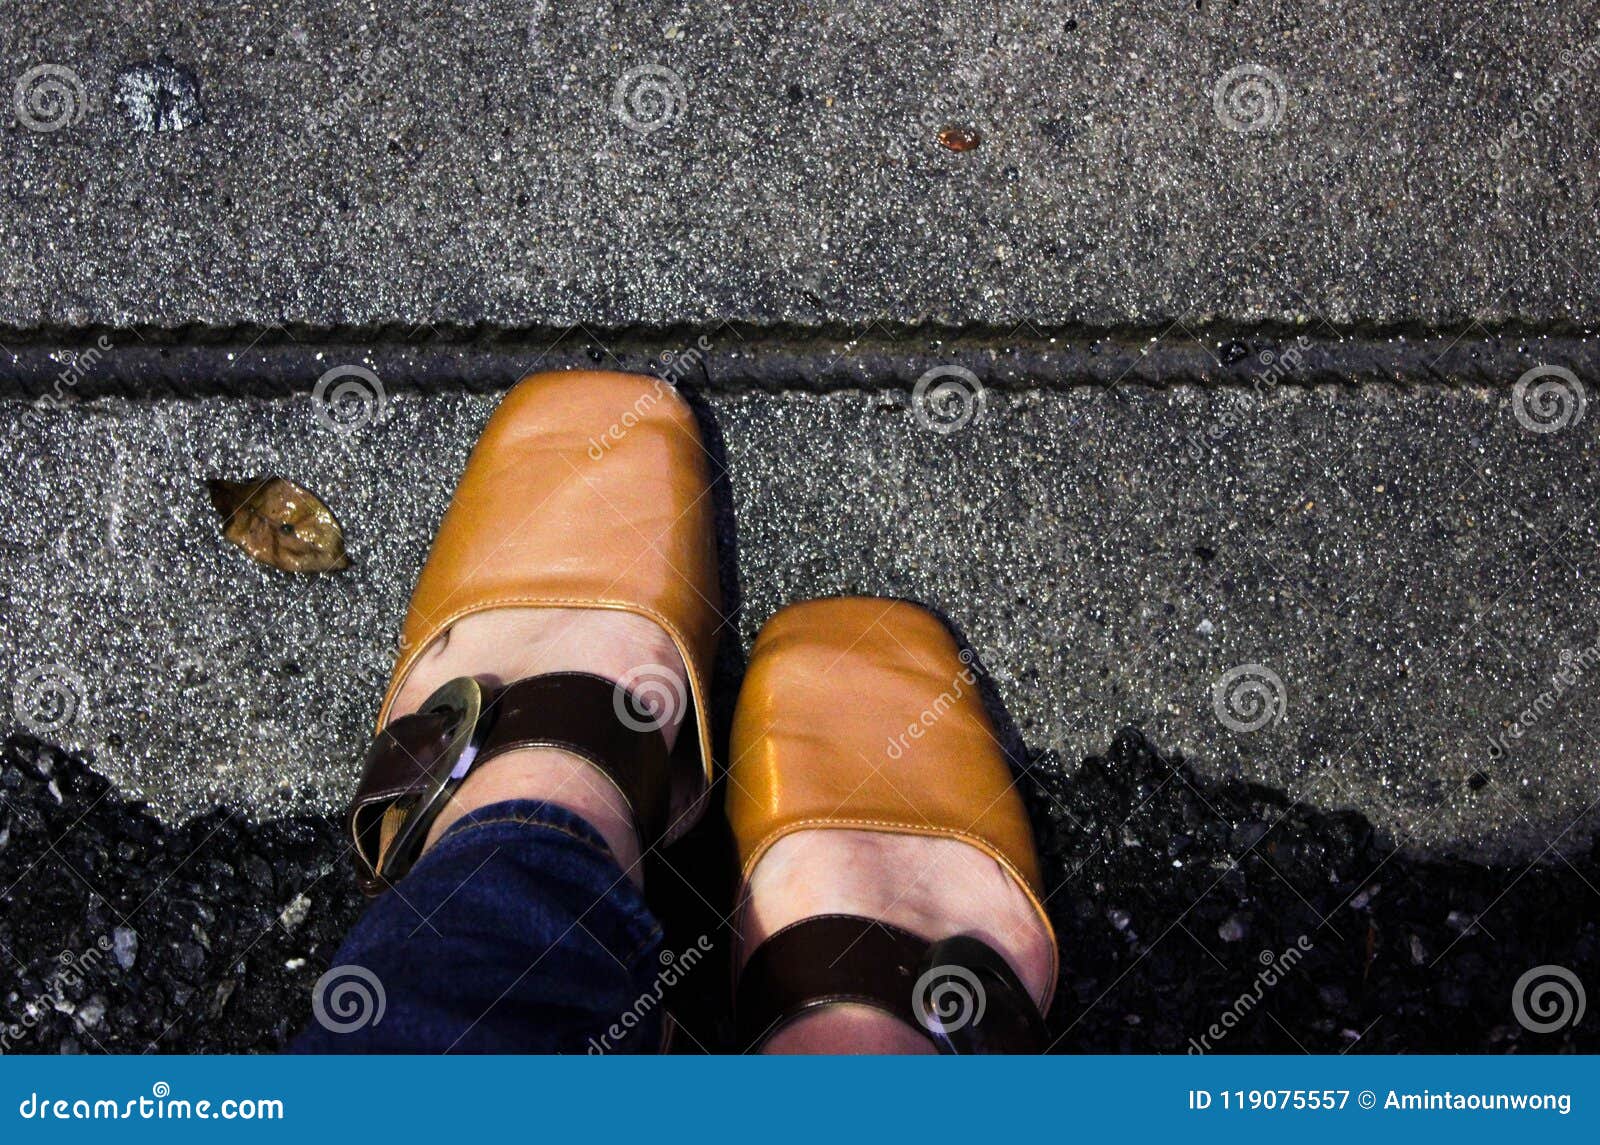 Women with Leather Shoes Steps on Concrete Floor, Top View Stock Image ...